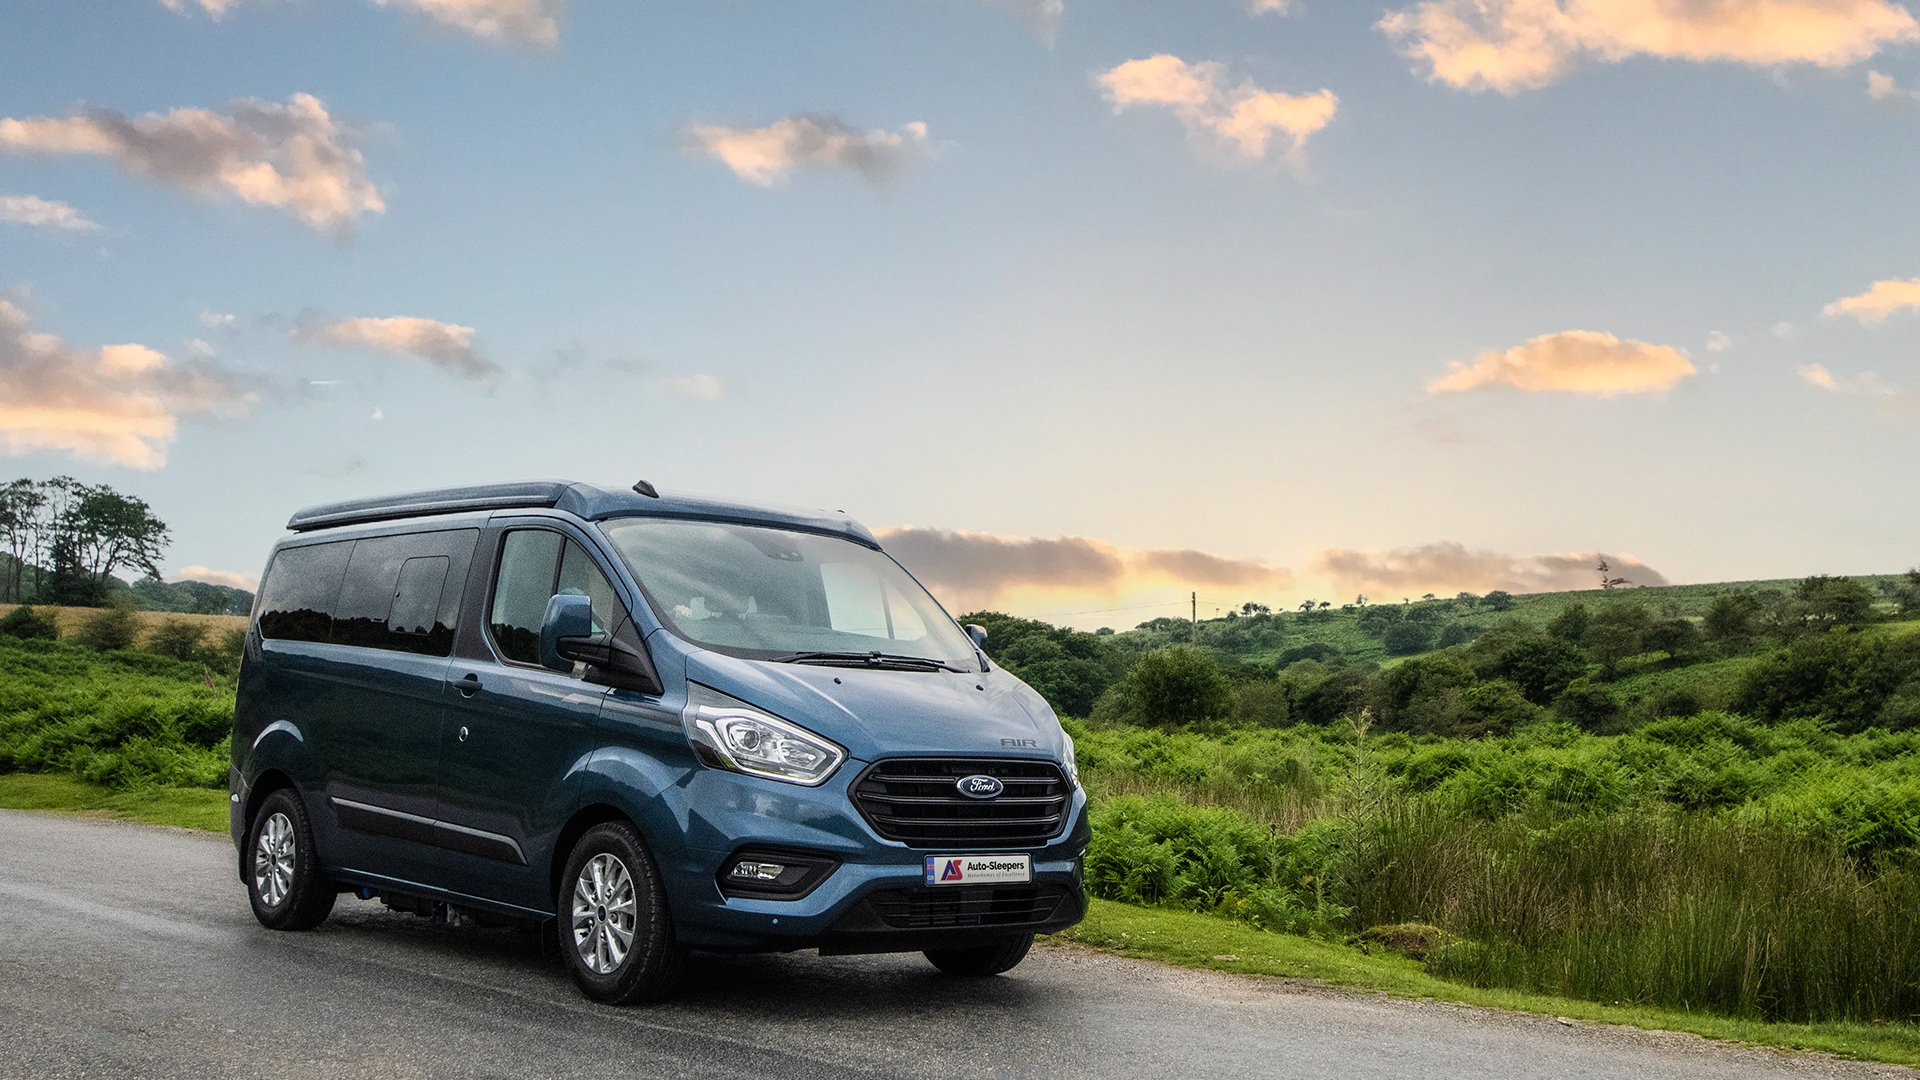 Auto-Sleepers Ford Air Campervan Review